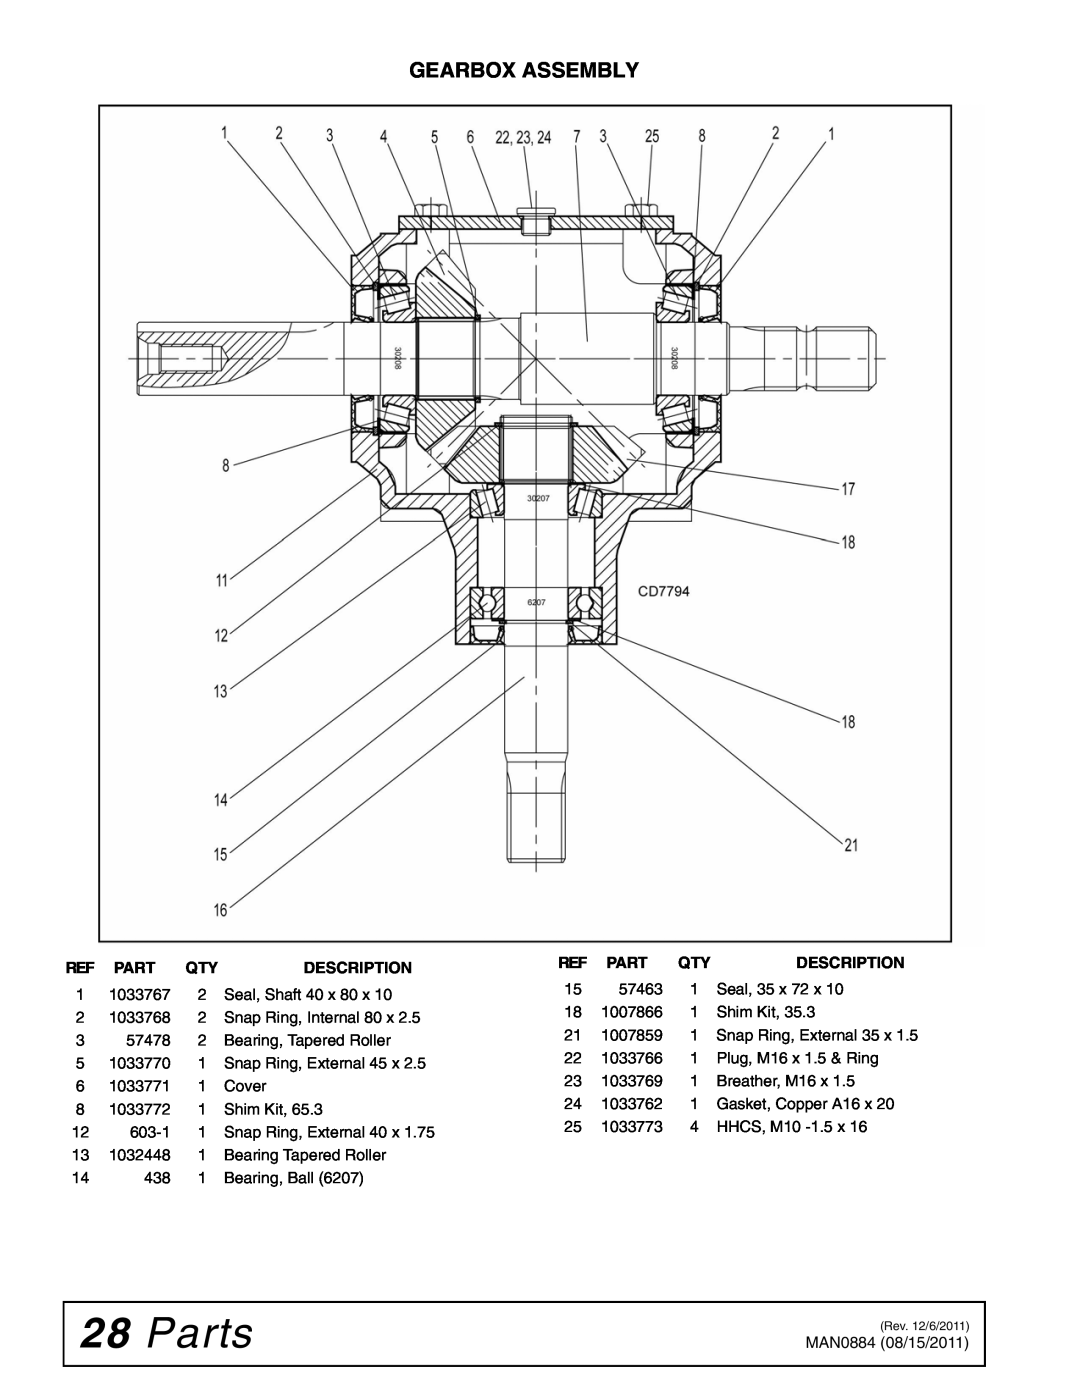 Woods Equipment SS96-2, SS84-2, SS108-2 manual Parts, Gearbox Assembly 